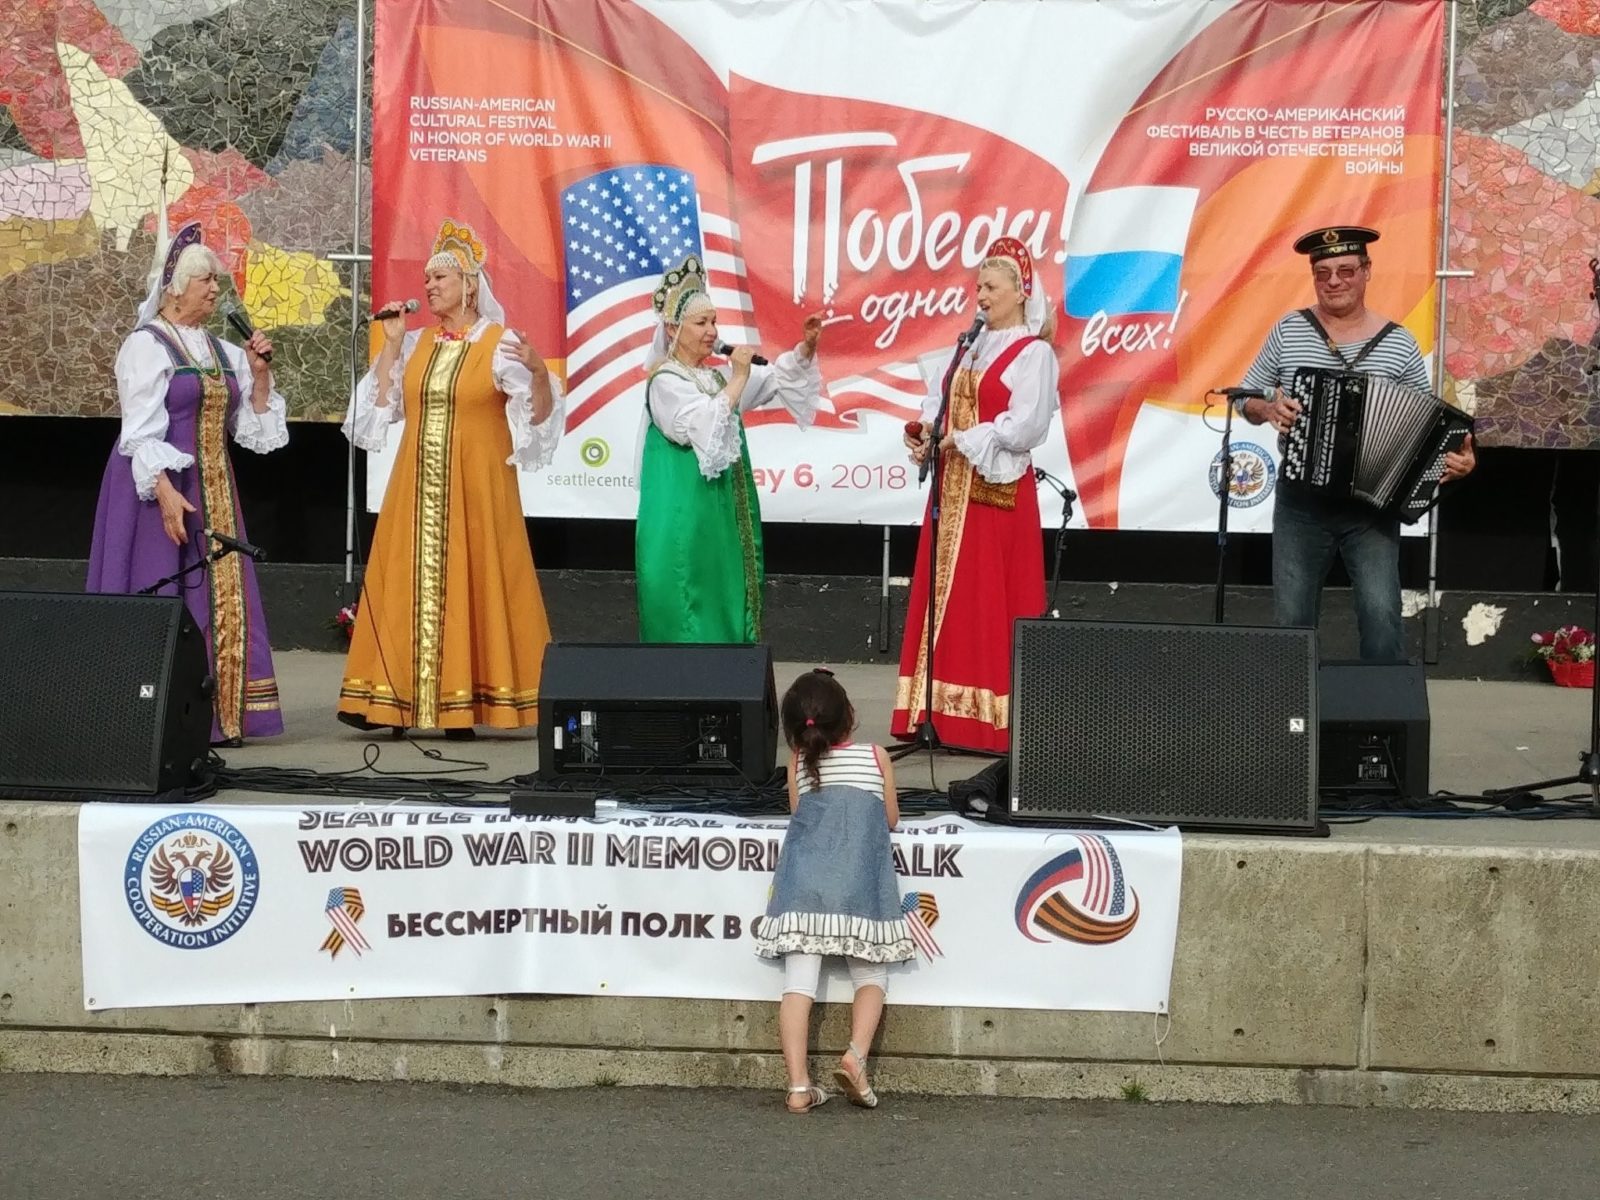 Performers on Seattle Center stage celebrate Russian-speaking World War II veterans and their families on Victory Day, celebrating the anniversary of the surrender of Nazi Germany to Allied forces.